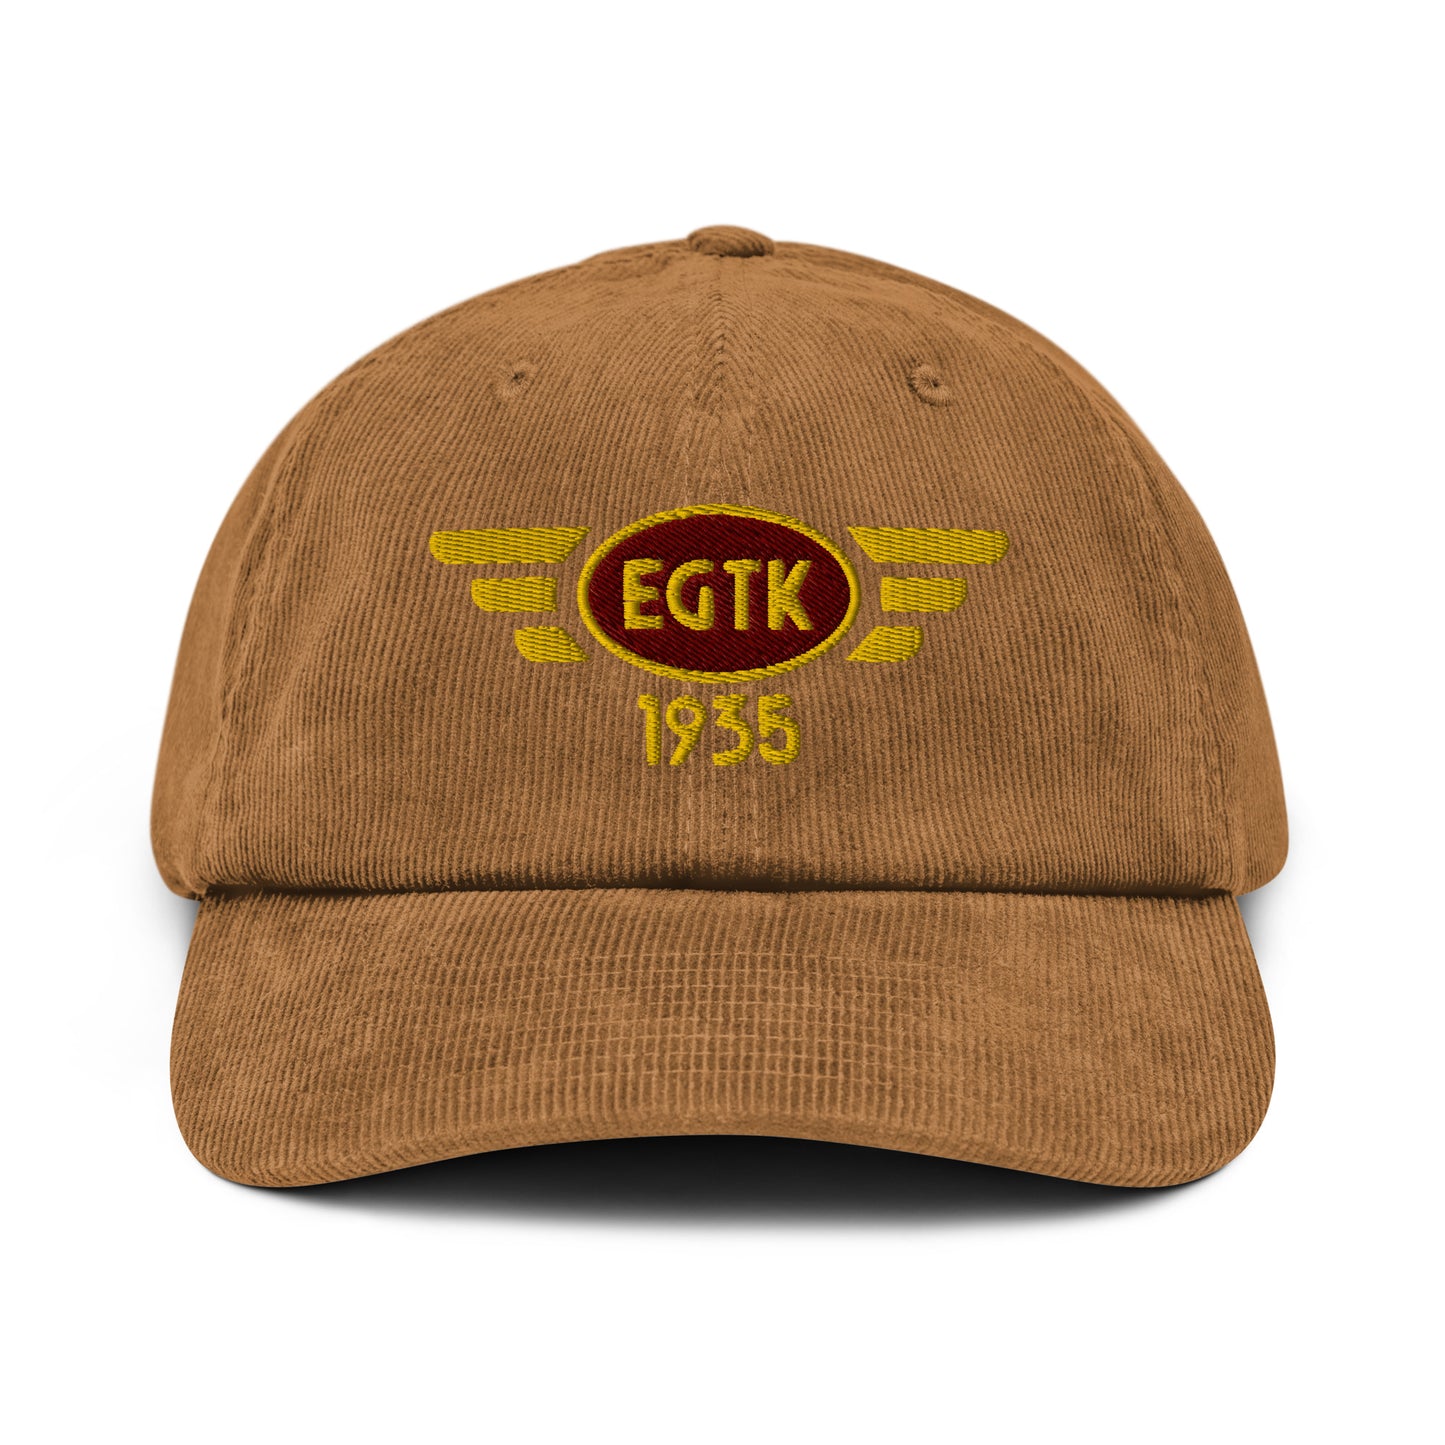 Kidlington Airport corduroy cap with embroidered ICAO code.